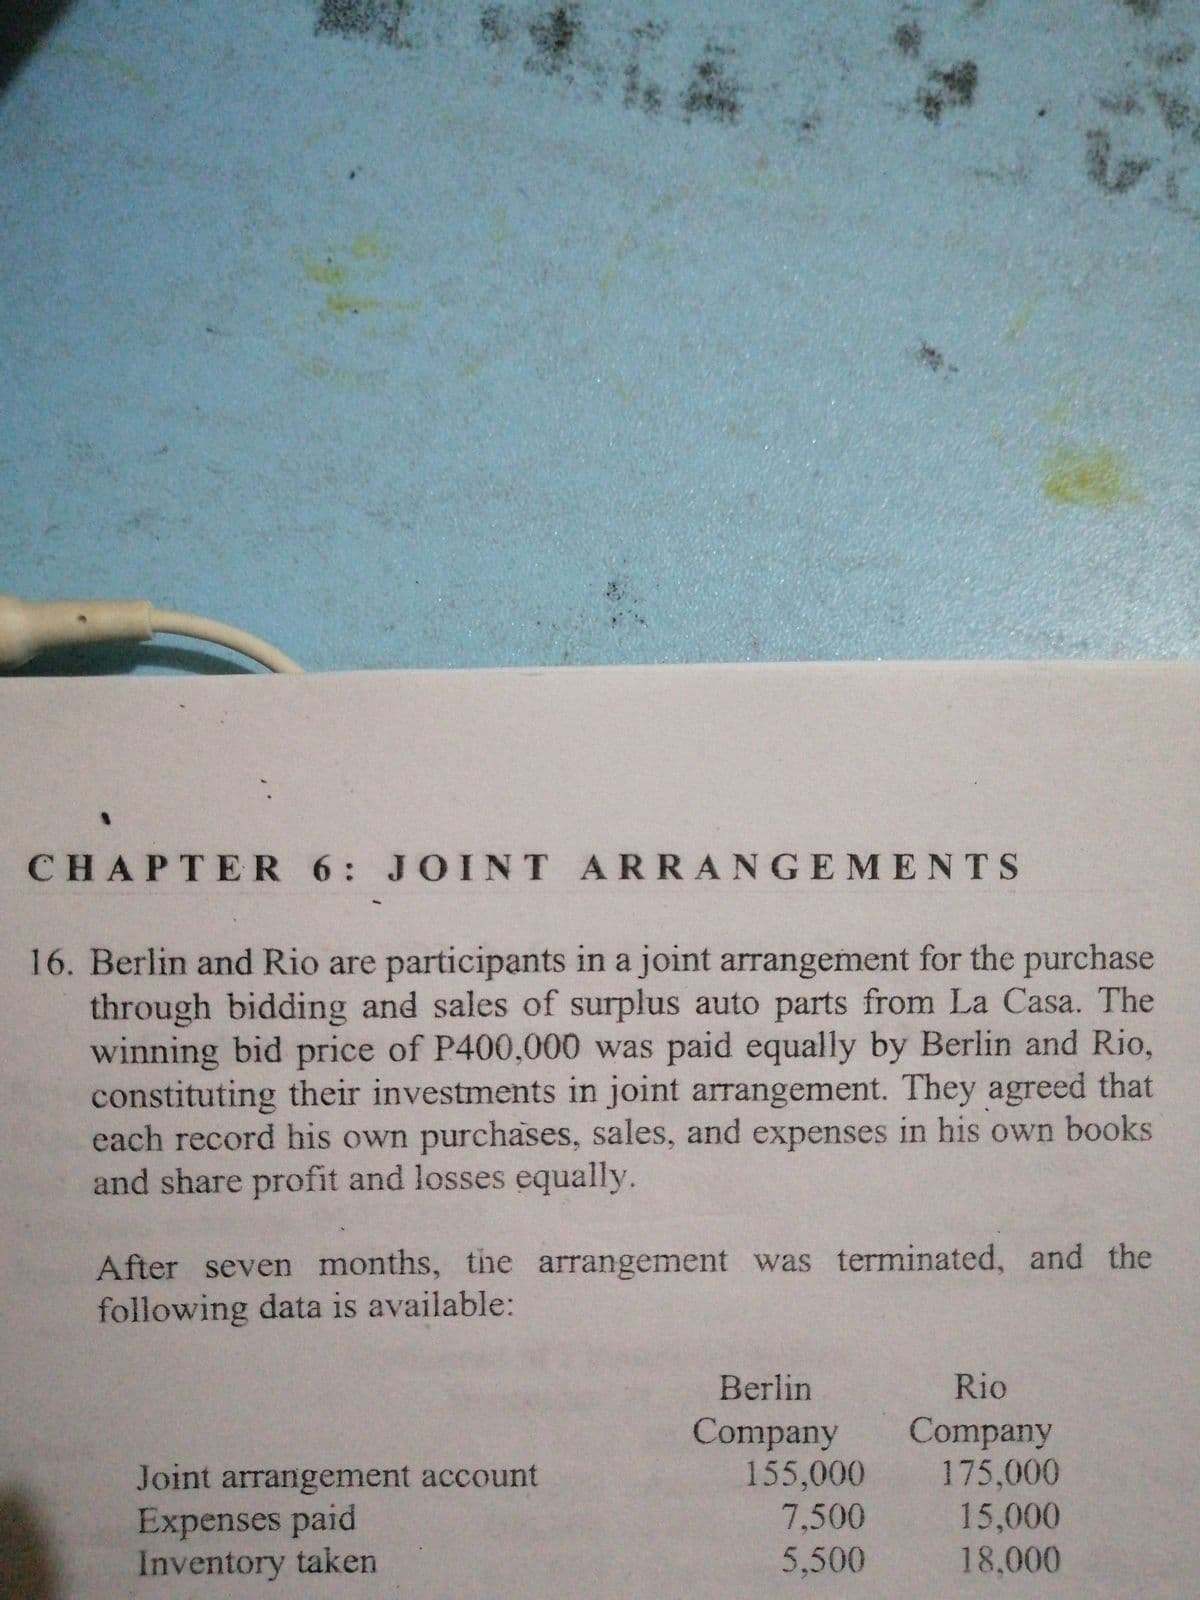 CHAPTER 6: JOINT ARRANGEMENTS
16. Berlin and Rio are participants in a joint arrangement for the purchase
through bidding and sales of surplus auto parts from La Casa. The
winning bid price of P400,000 was paid equally by Berlin and Rio,
constituting their investments in joint arrangement. They agreed that
each record his own purchases, sales, and expenses in his own books
and share profit and losses equally.
After seven months, the arrangement was terminated, and the
following data is available:
Berlin
Rio
Joint arrangement account
Expenses paid
Inventory taken
Company
155,000
7,500
5,500
Company
175,000
15,000
18,000
